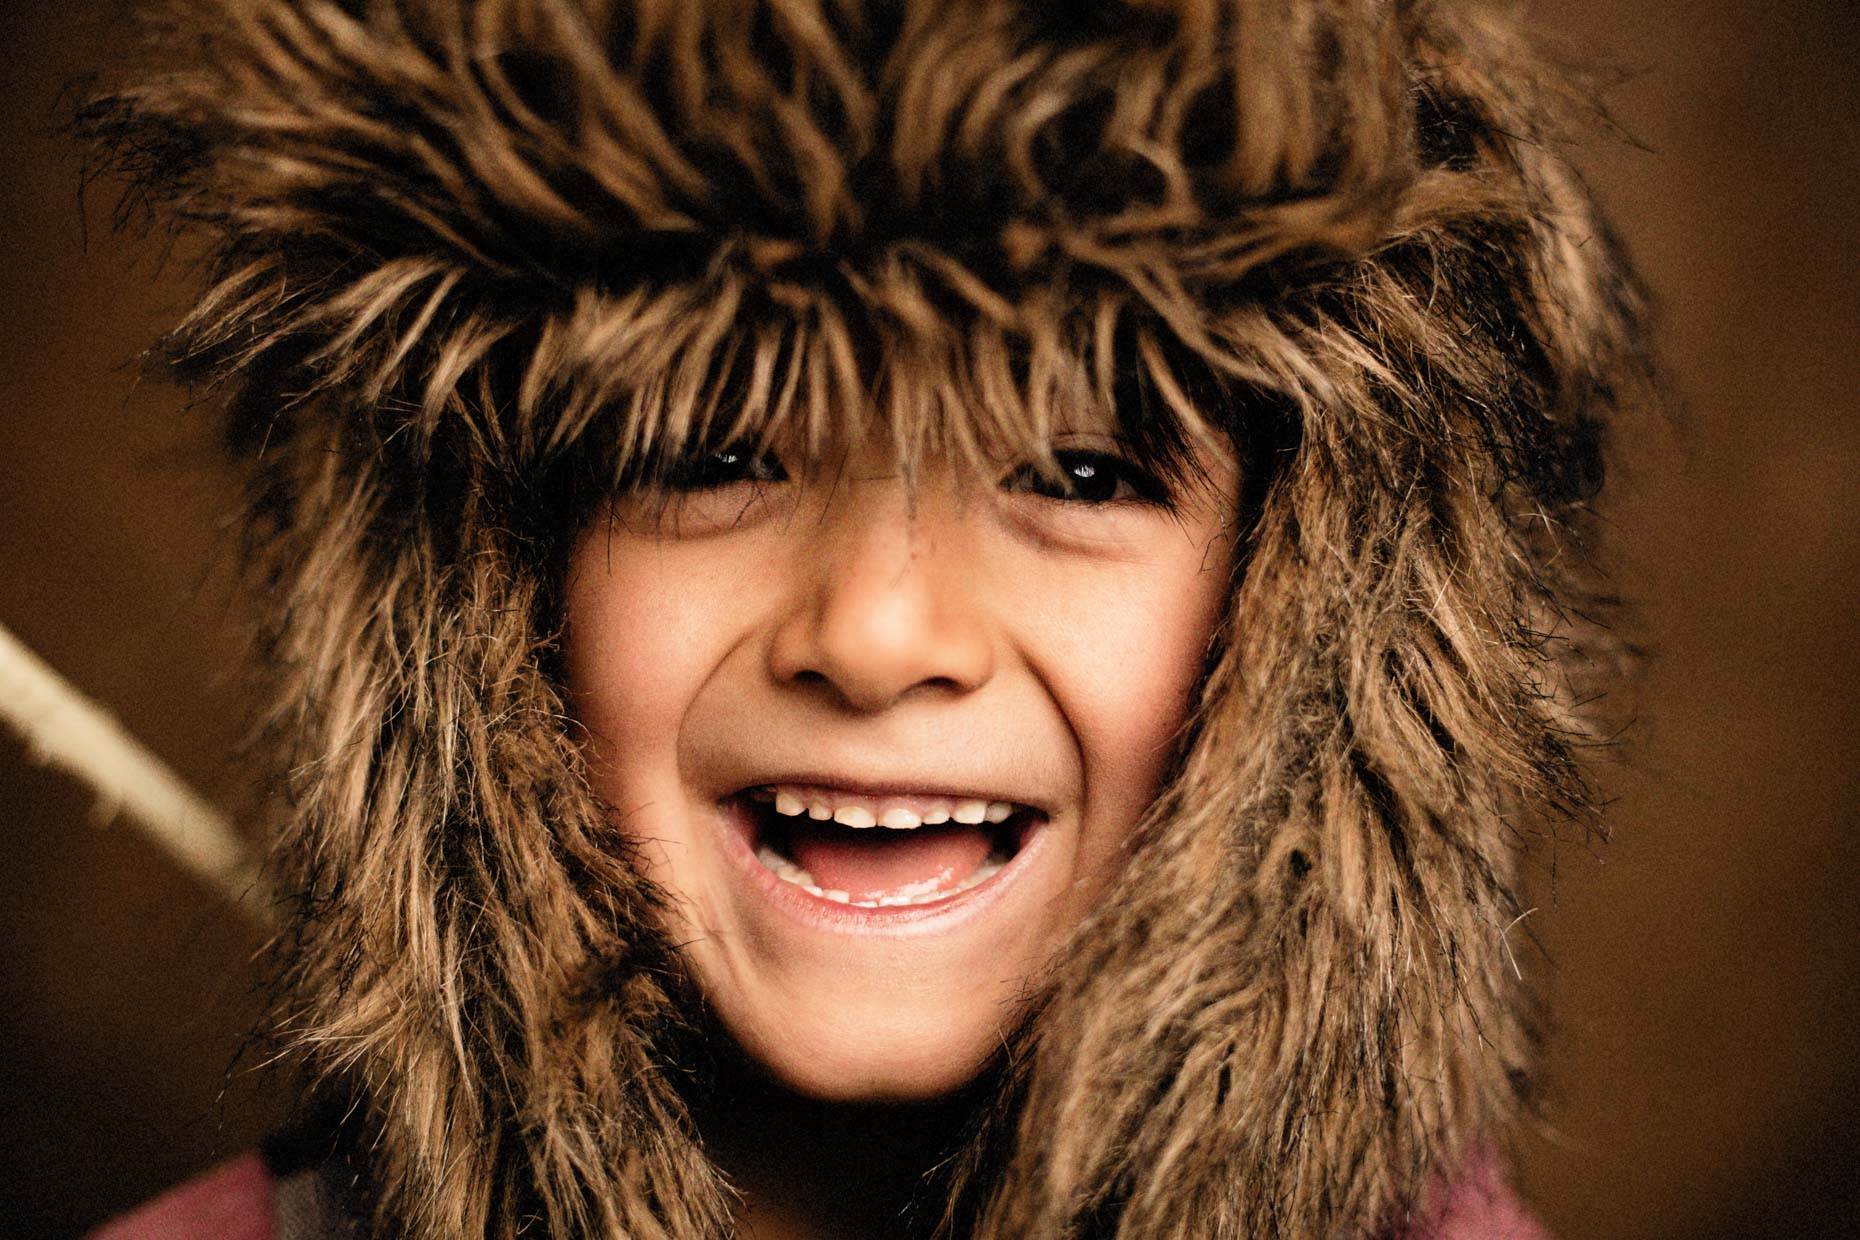 A studio portrait of a strong, handsome 7-year-old boy who is a mountain man at hat. Here he wears his mountain man vest, a pelt hat, and has a bow and arrow that he made. Someday he wants to build a cabin and live in the middle of the woods. This portrait was created by Steve Glass, owner of Glass Photography Portrait Studio. In all, of his portraits he is seeking the Imago Dei – the image of God – in each of his subjects. This means uncovering the unique interests, creativity, ingenuity and beauty that each person possesses. This deepest portion of a person that is created in the image of God, the Imago Dei. Steve Glass, a professional portrait photographer of Glass Photography services the men, women, children, kids, families, business and people of Fort Collins, Windsor, Loveland, Wellington and the surrounding areas of Northern Colorado and southern Wyoming (and sometime Denver), through professional photography by creating timeless portraits and heirloom prints, ranging from corporate portraits, corporate headshots, environmental portraits, editorial portraits, and beauty portraits.